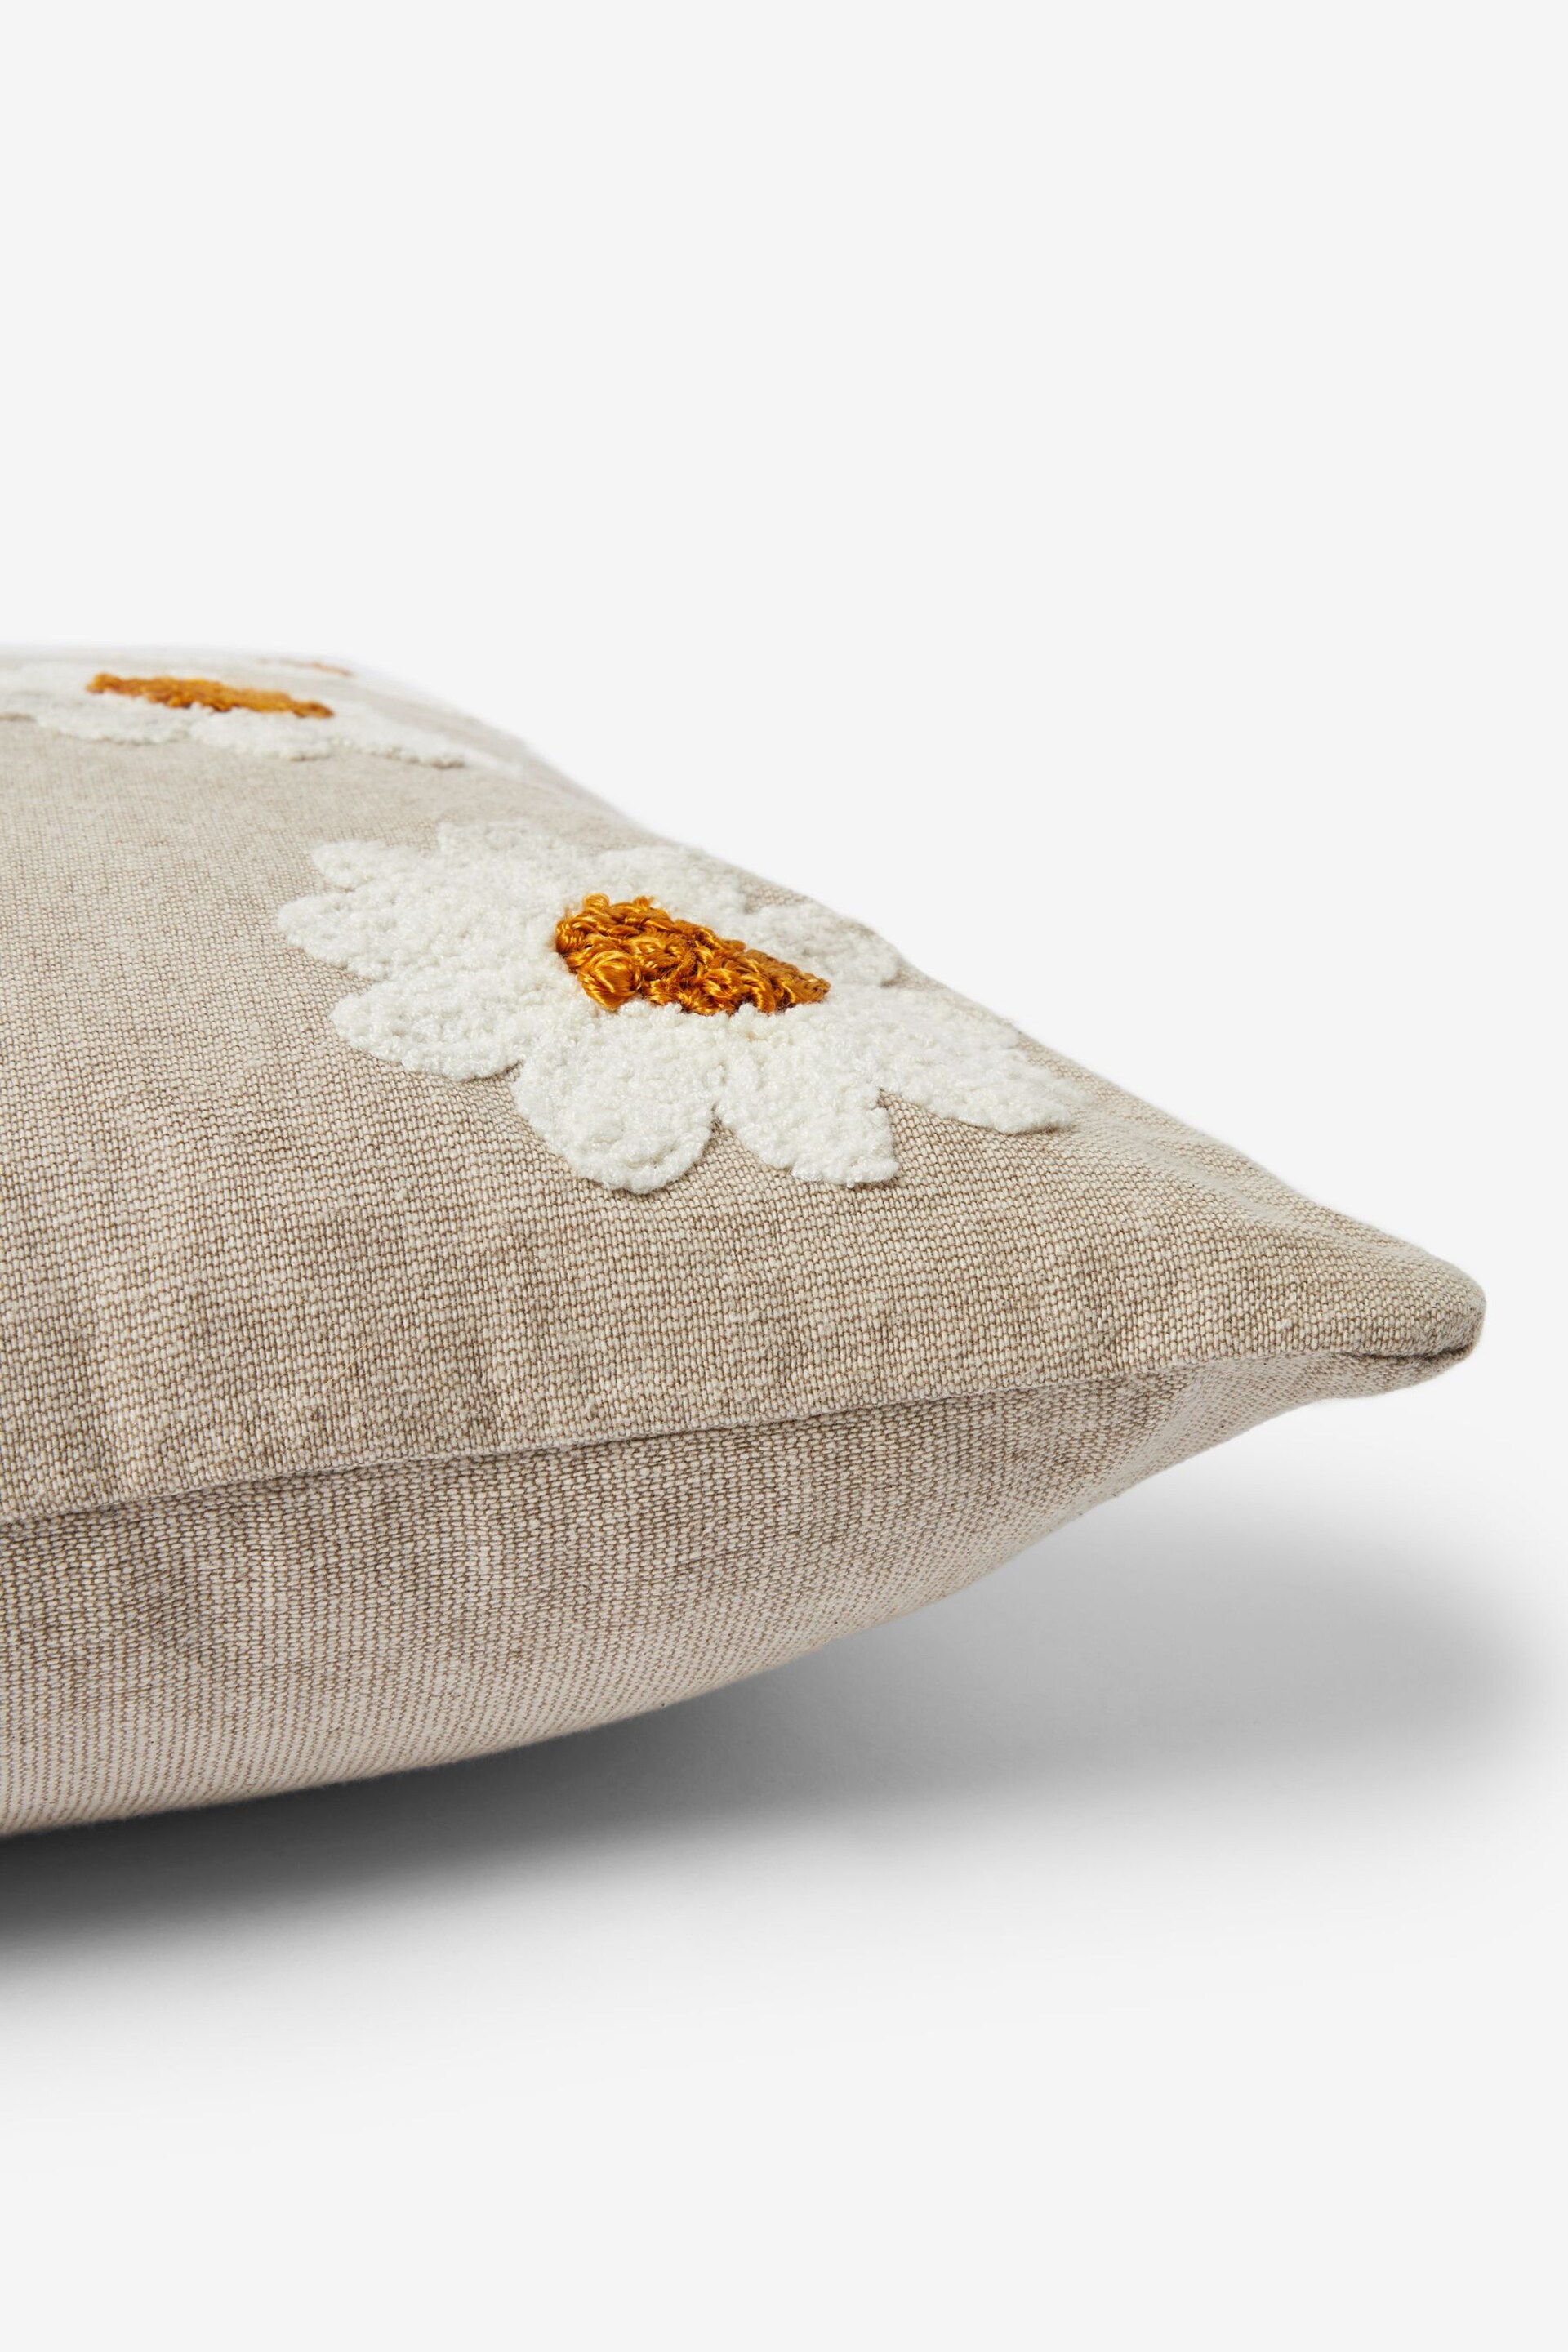 Natural 50 x 50cm Tufted Daisy Cushion - Image 2 of 4